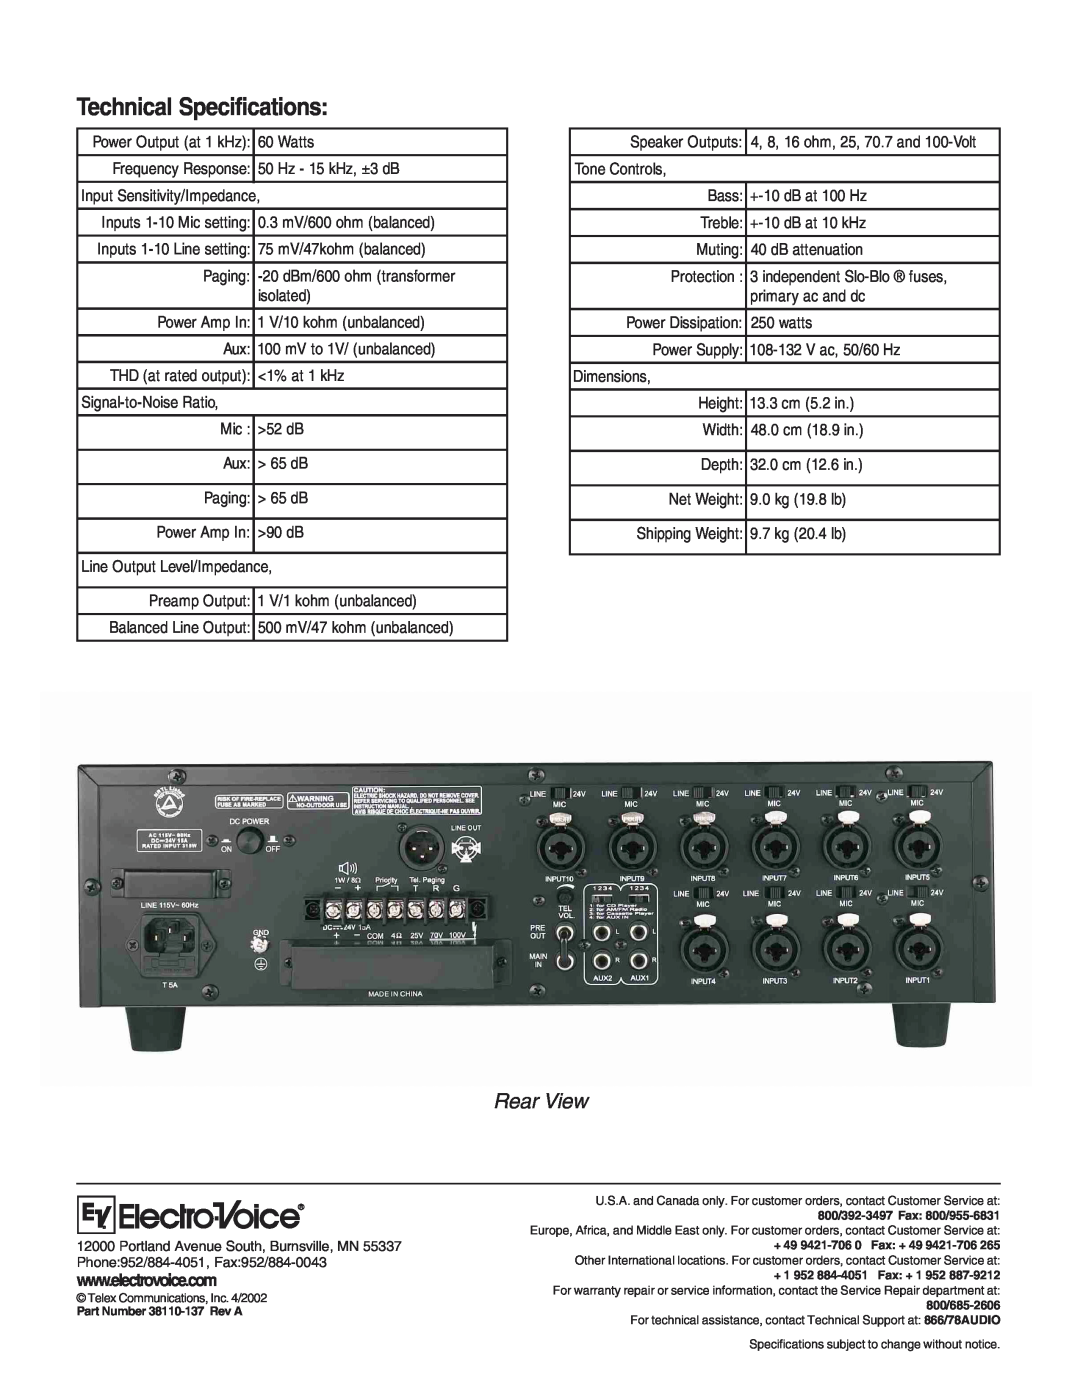 Electro-Voice MA-1206 specifications Technical Specifications, Rear View 